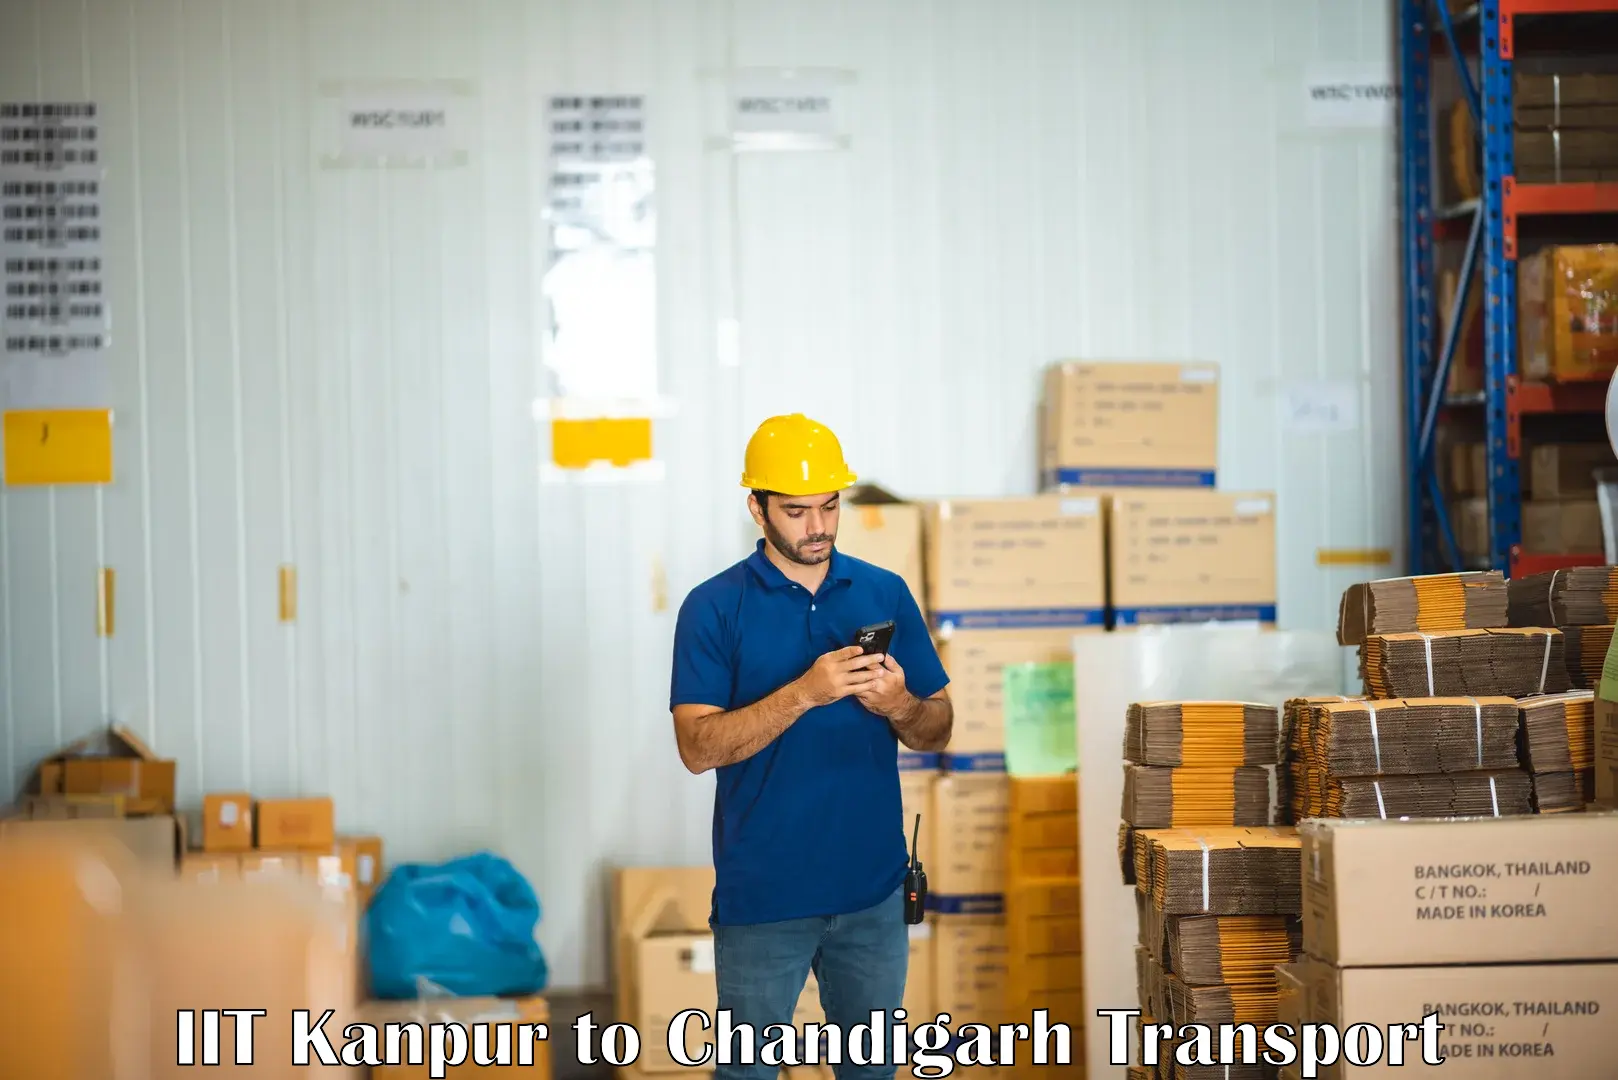 Vehicle parcel service IIT Kanpur to Chandigarh